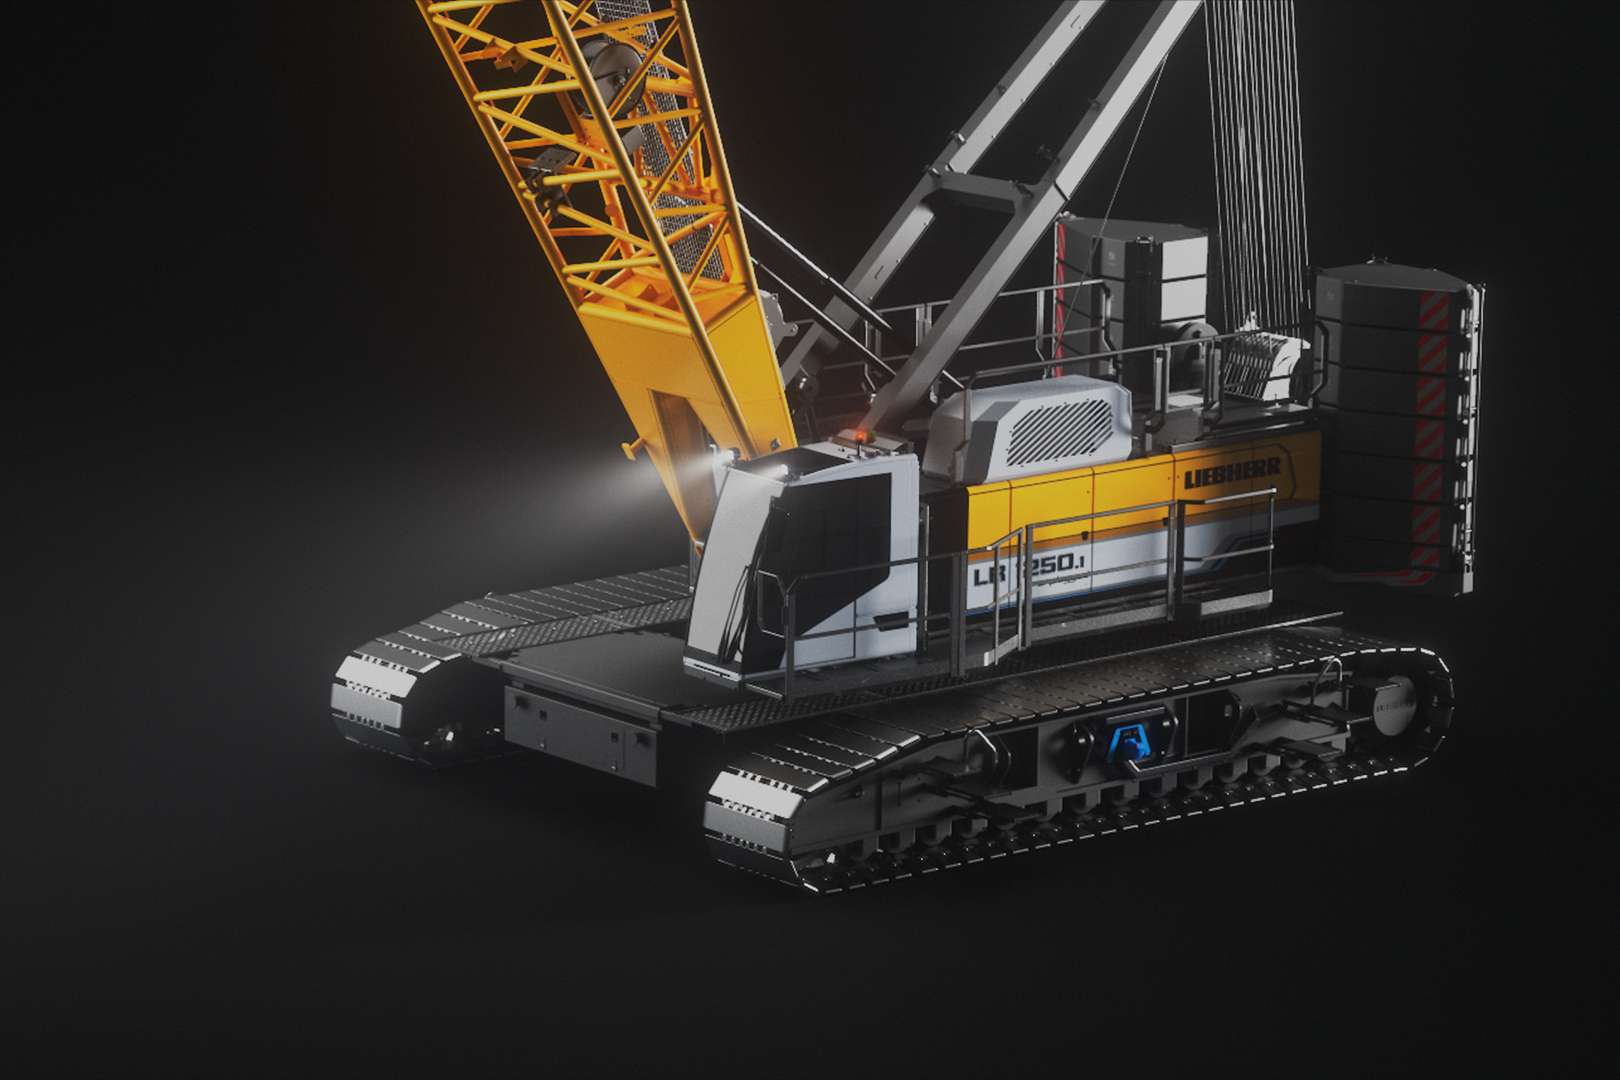 The World’s First Battery-Powered Crawler Crane Has Arrived From Liebherr